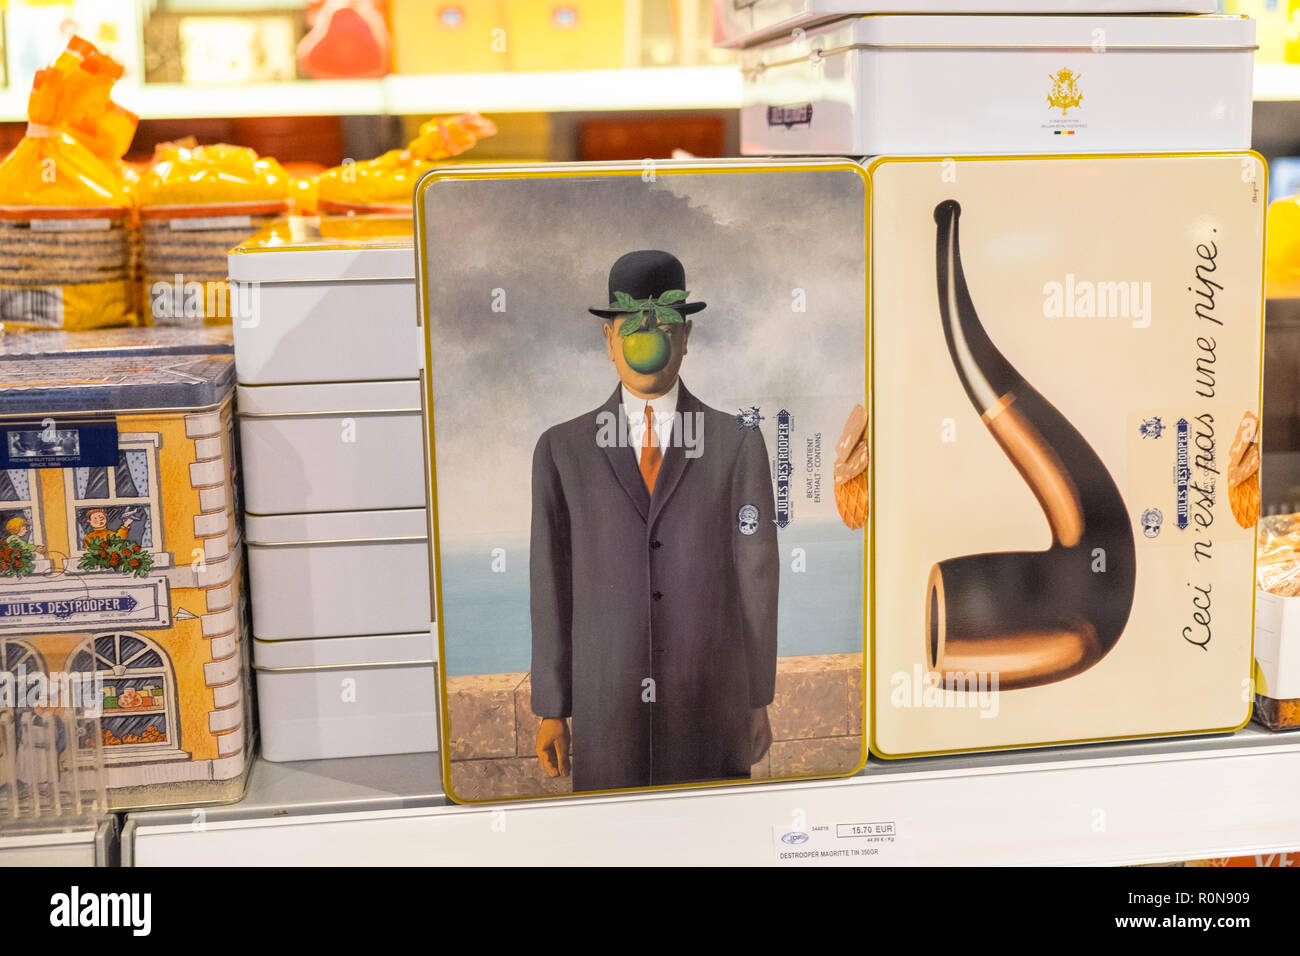 Rene Magritte,surreal,art,This is not a pipe,Duty Free zone at Departure,Departures,Terminal,building,Brussels Airport,Belgium,Europe,European, Stock Photo